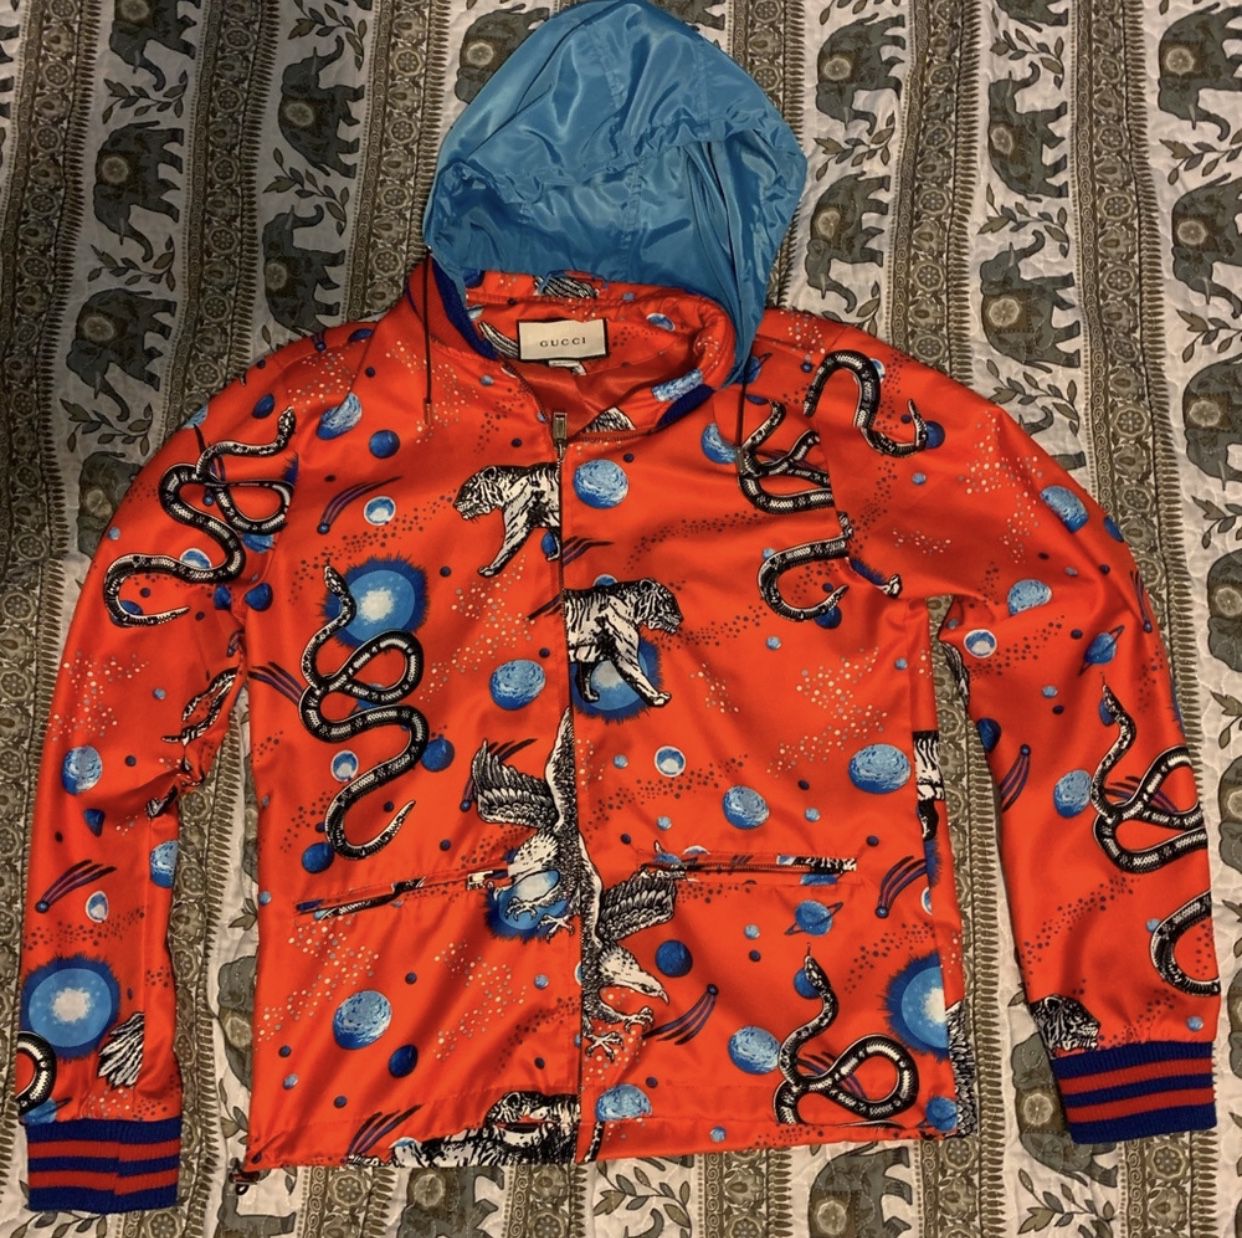 Gucci Space Animal Bomber Jacket